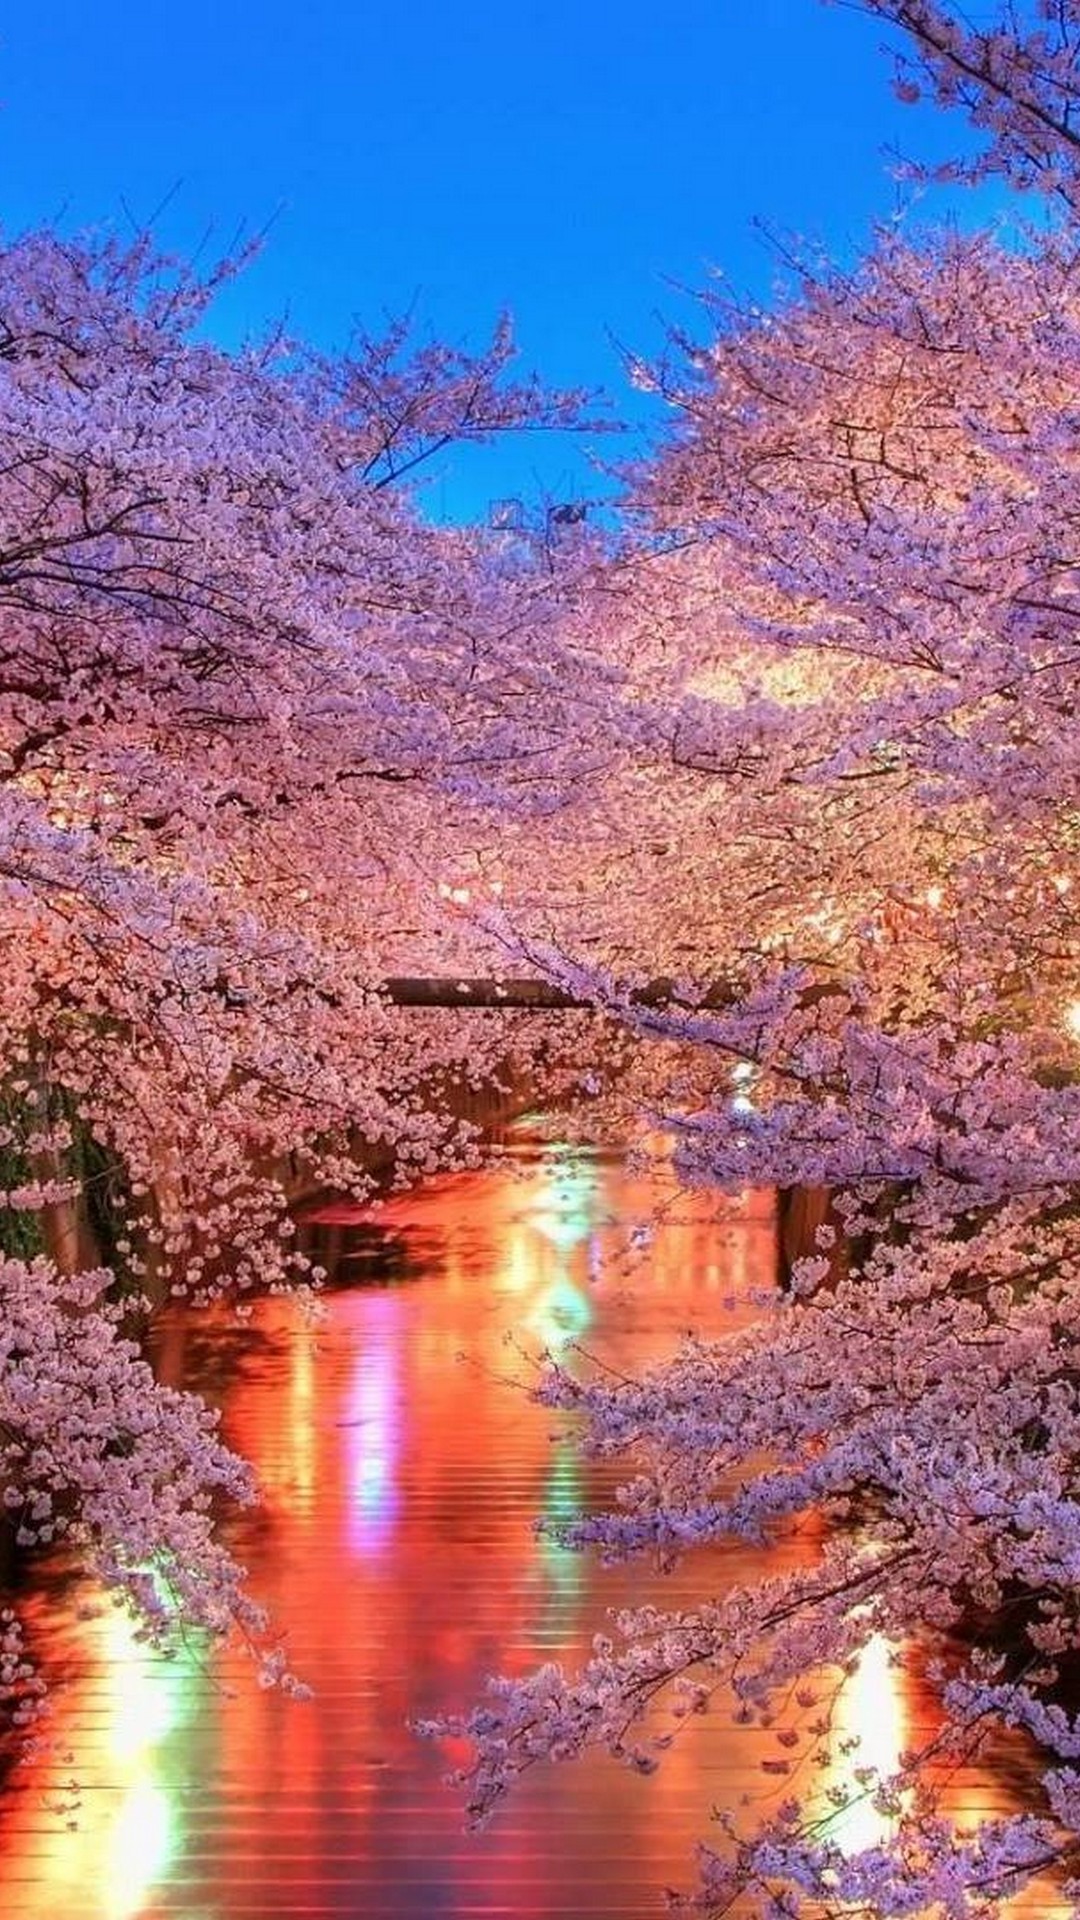 Japan Flowers Images Wallpapers